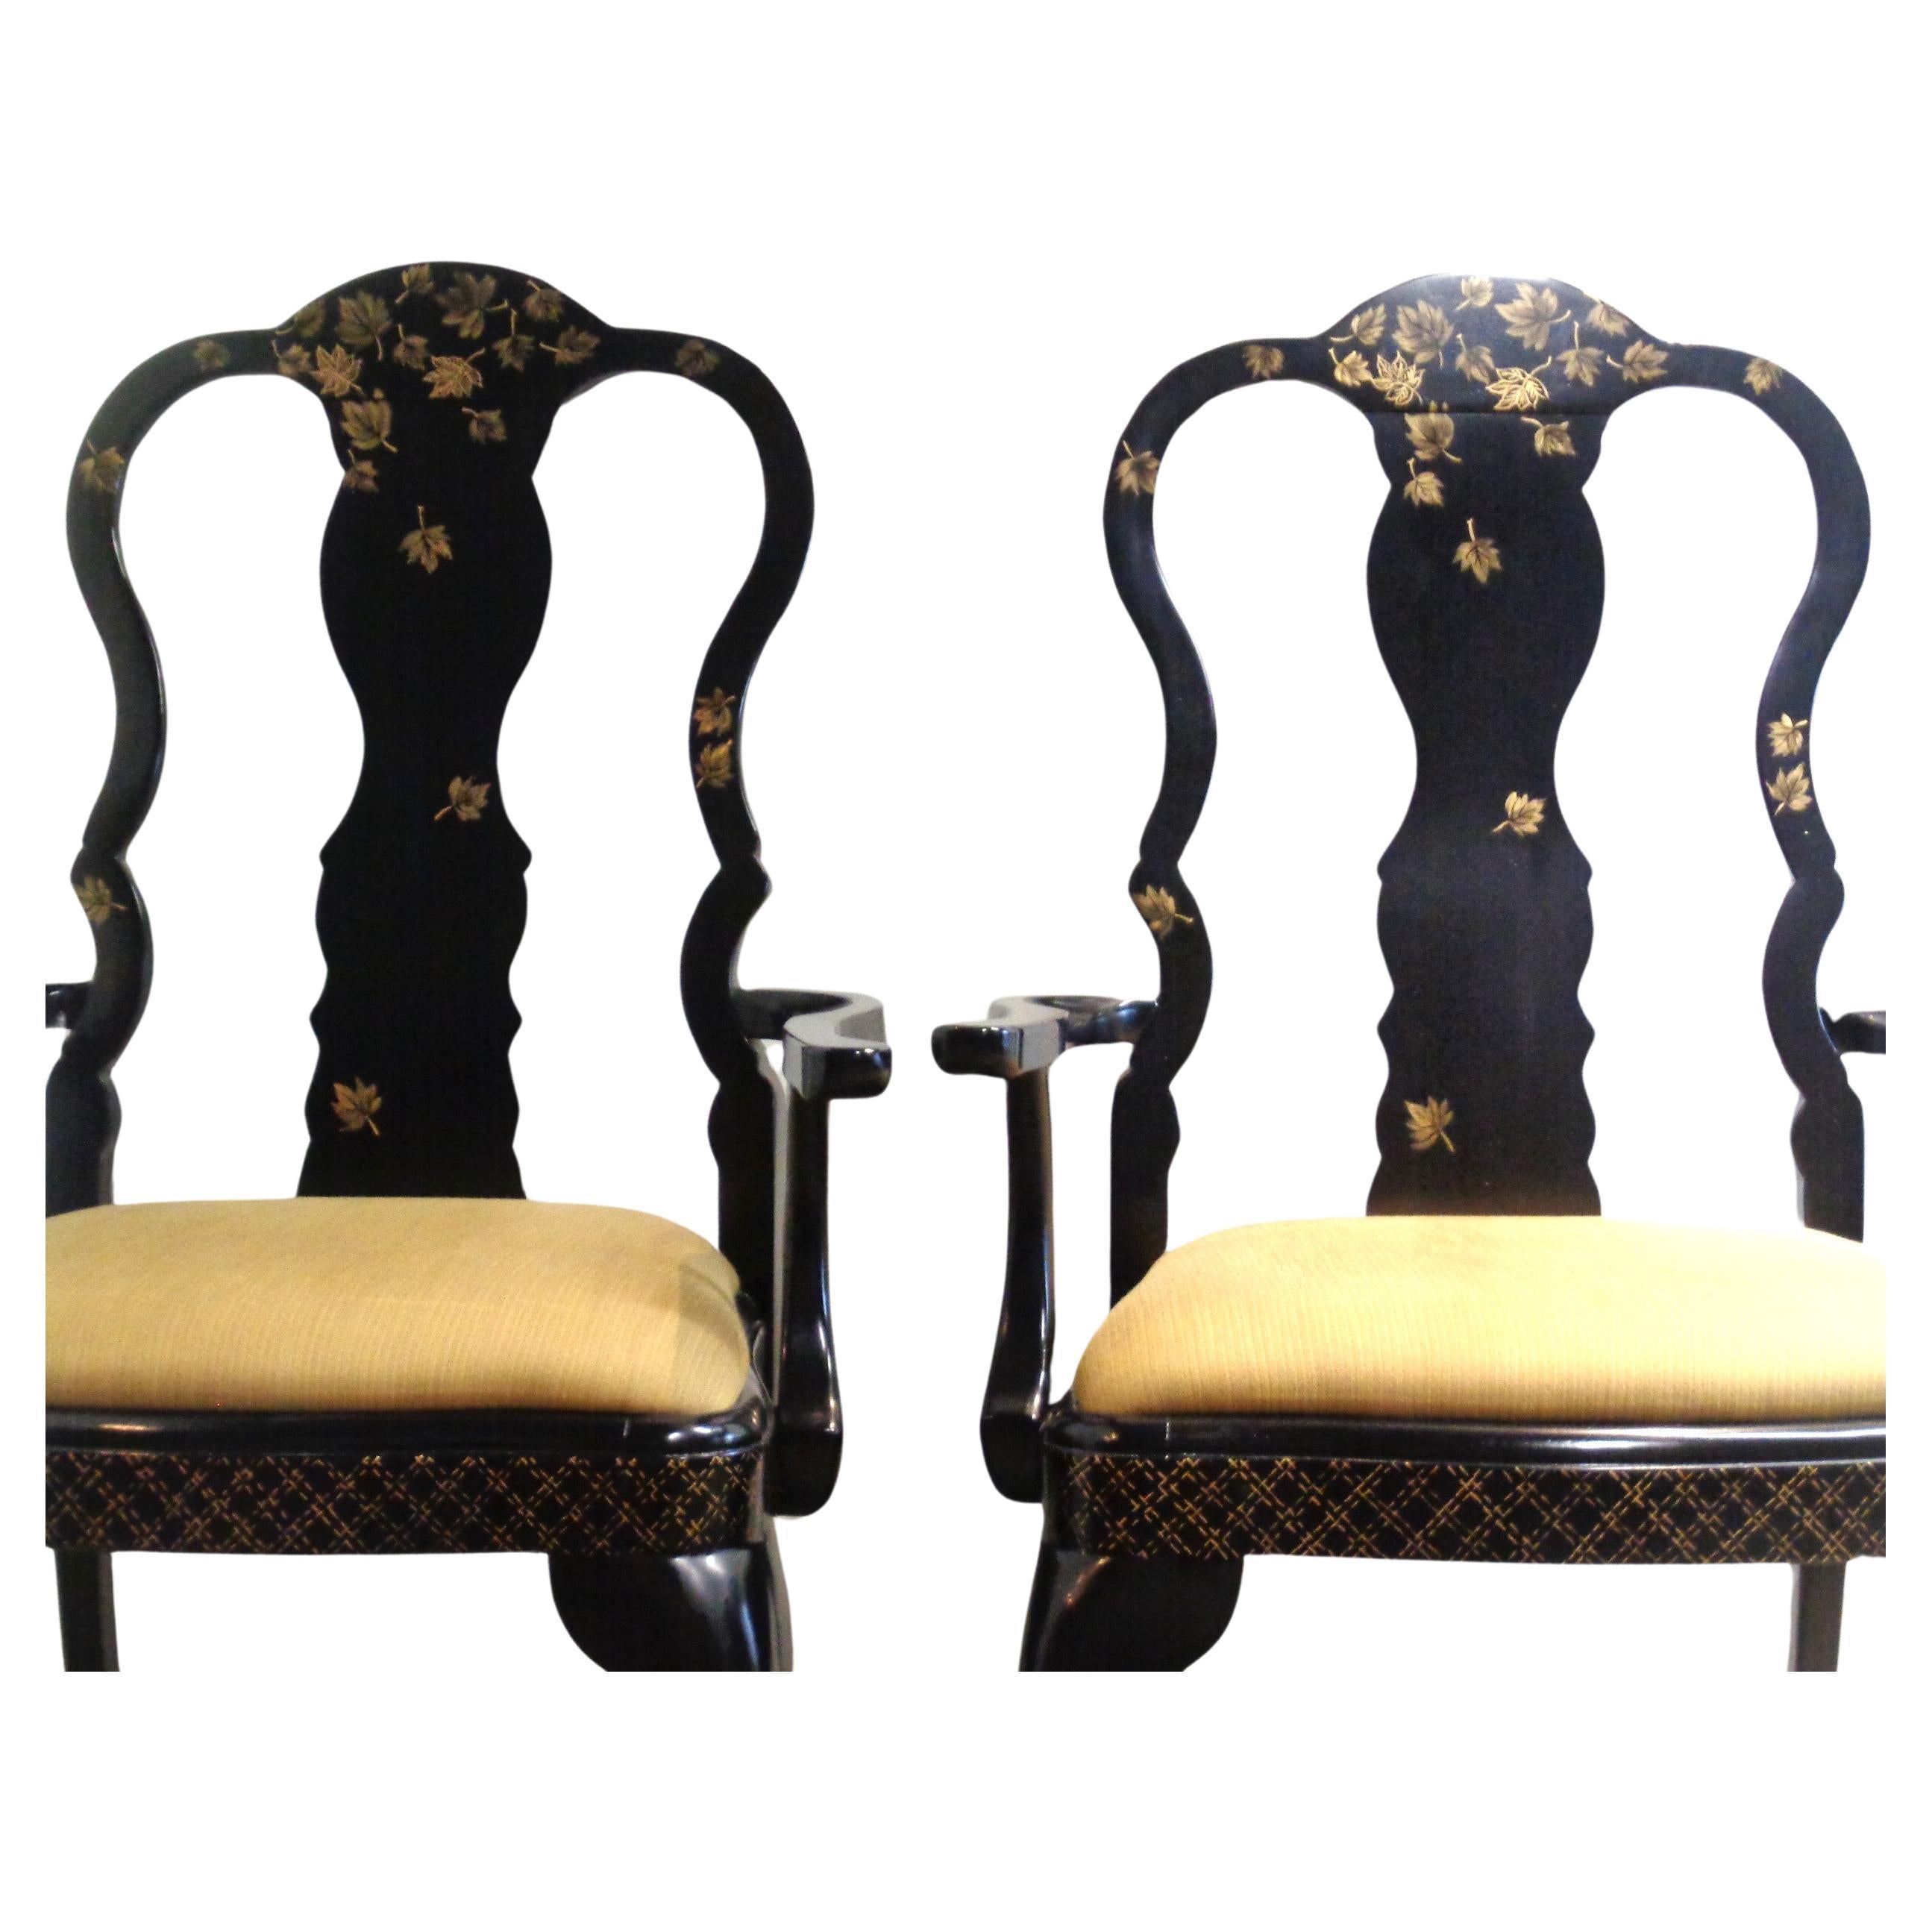 A pair of Queen Anne style black lacquered armchairs in all original beautiful glowing surface w/ finely gilded chinoiserie decoration of floating leaves and cross hatching. Measure 42 1/2